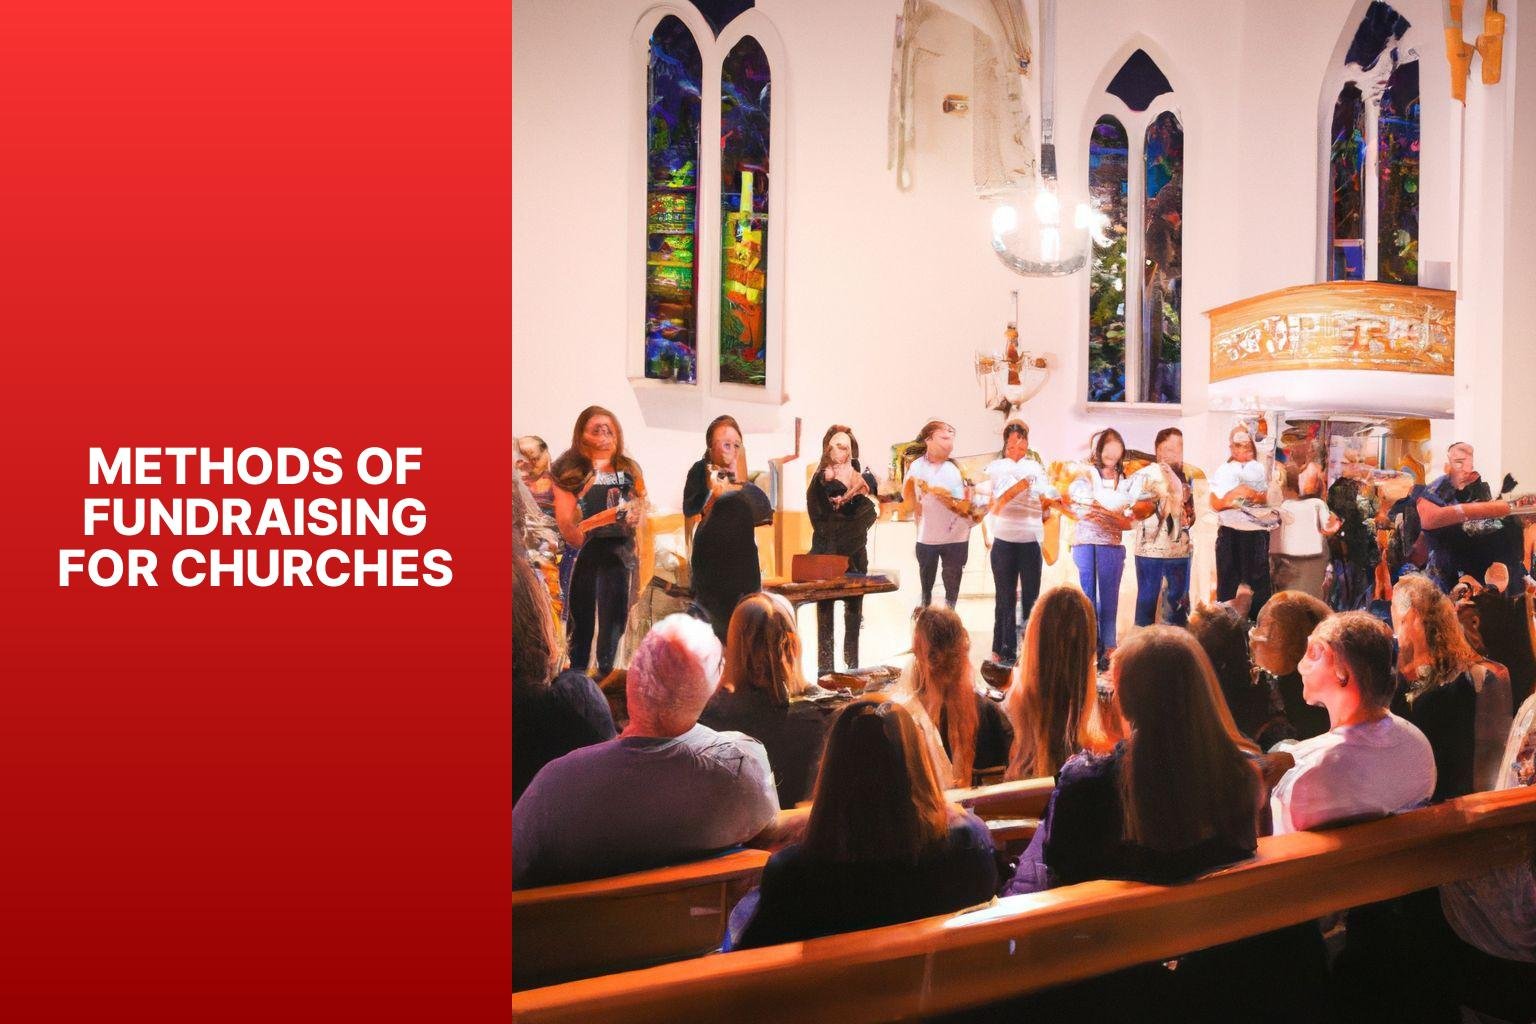 Methods of Fundraising for Churches - how do churches make money 